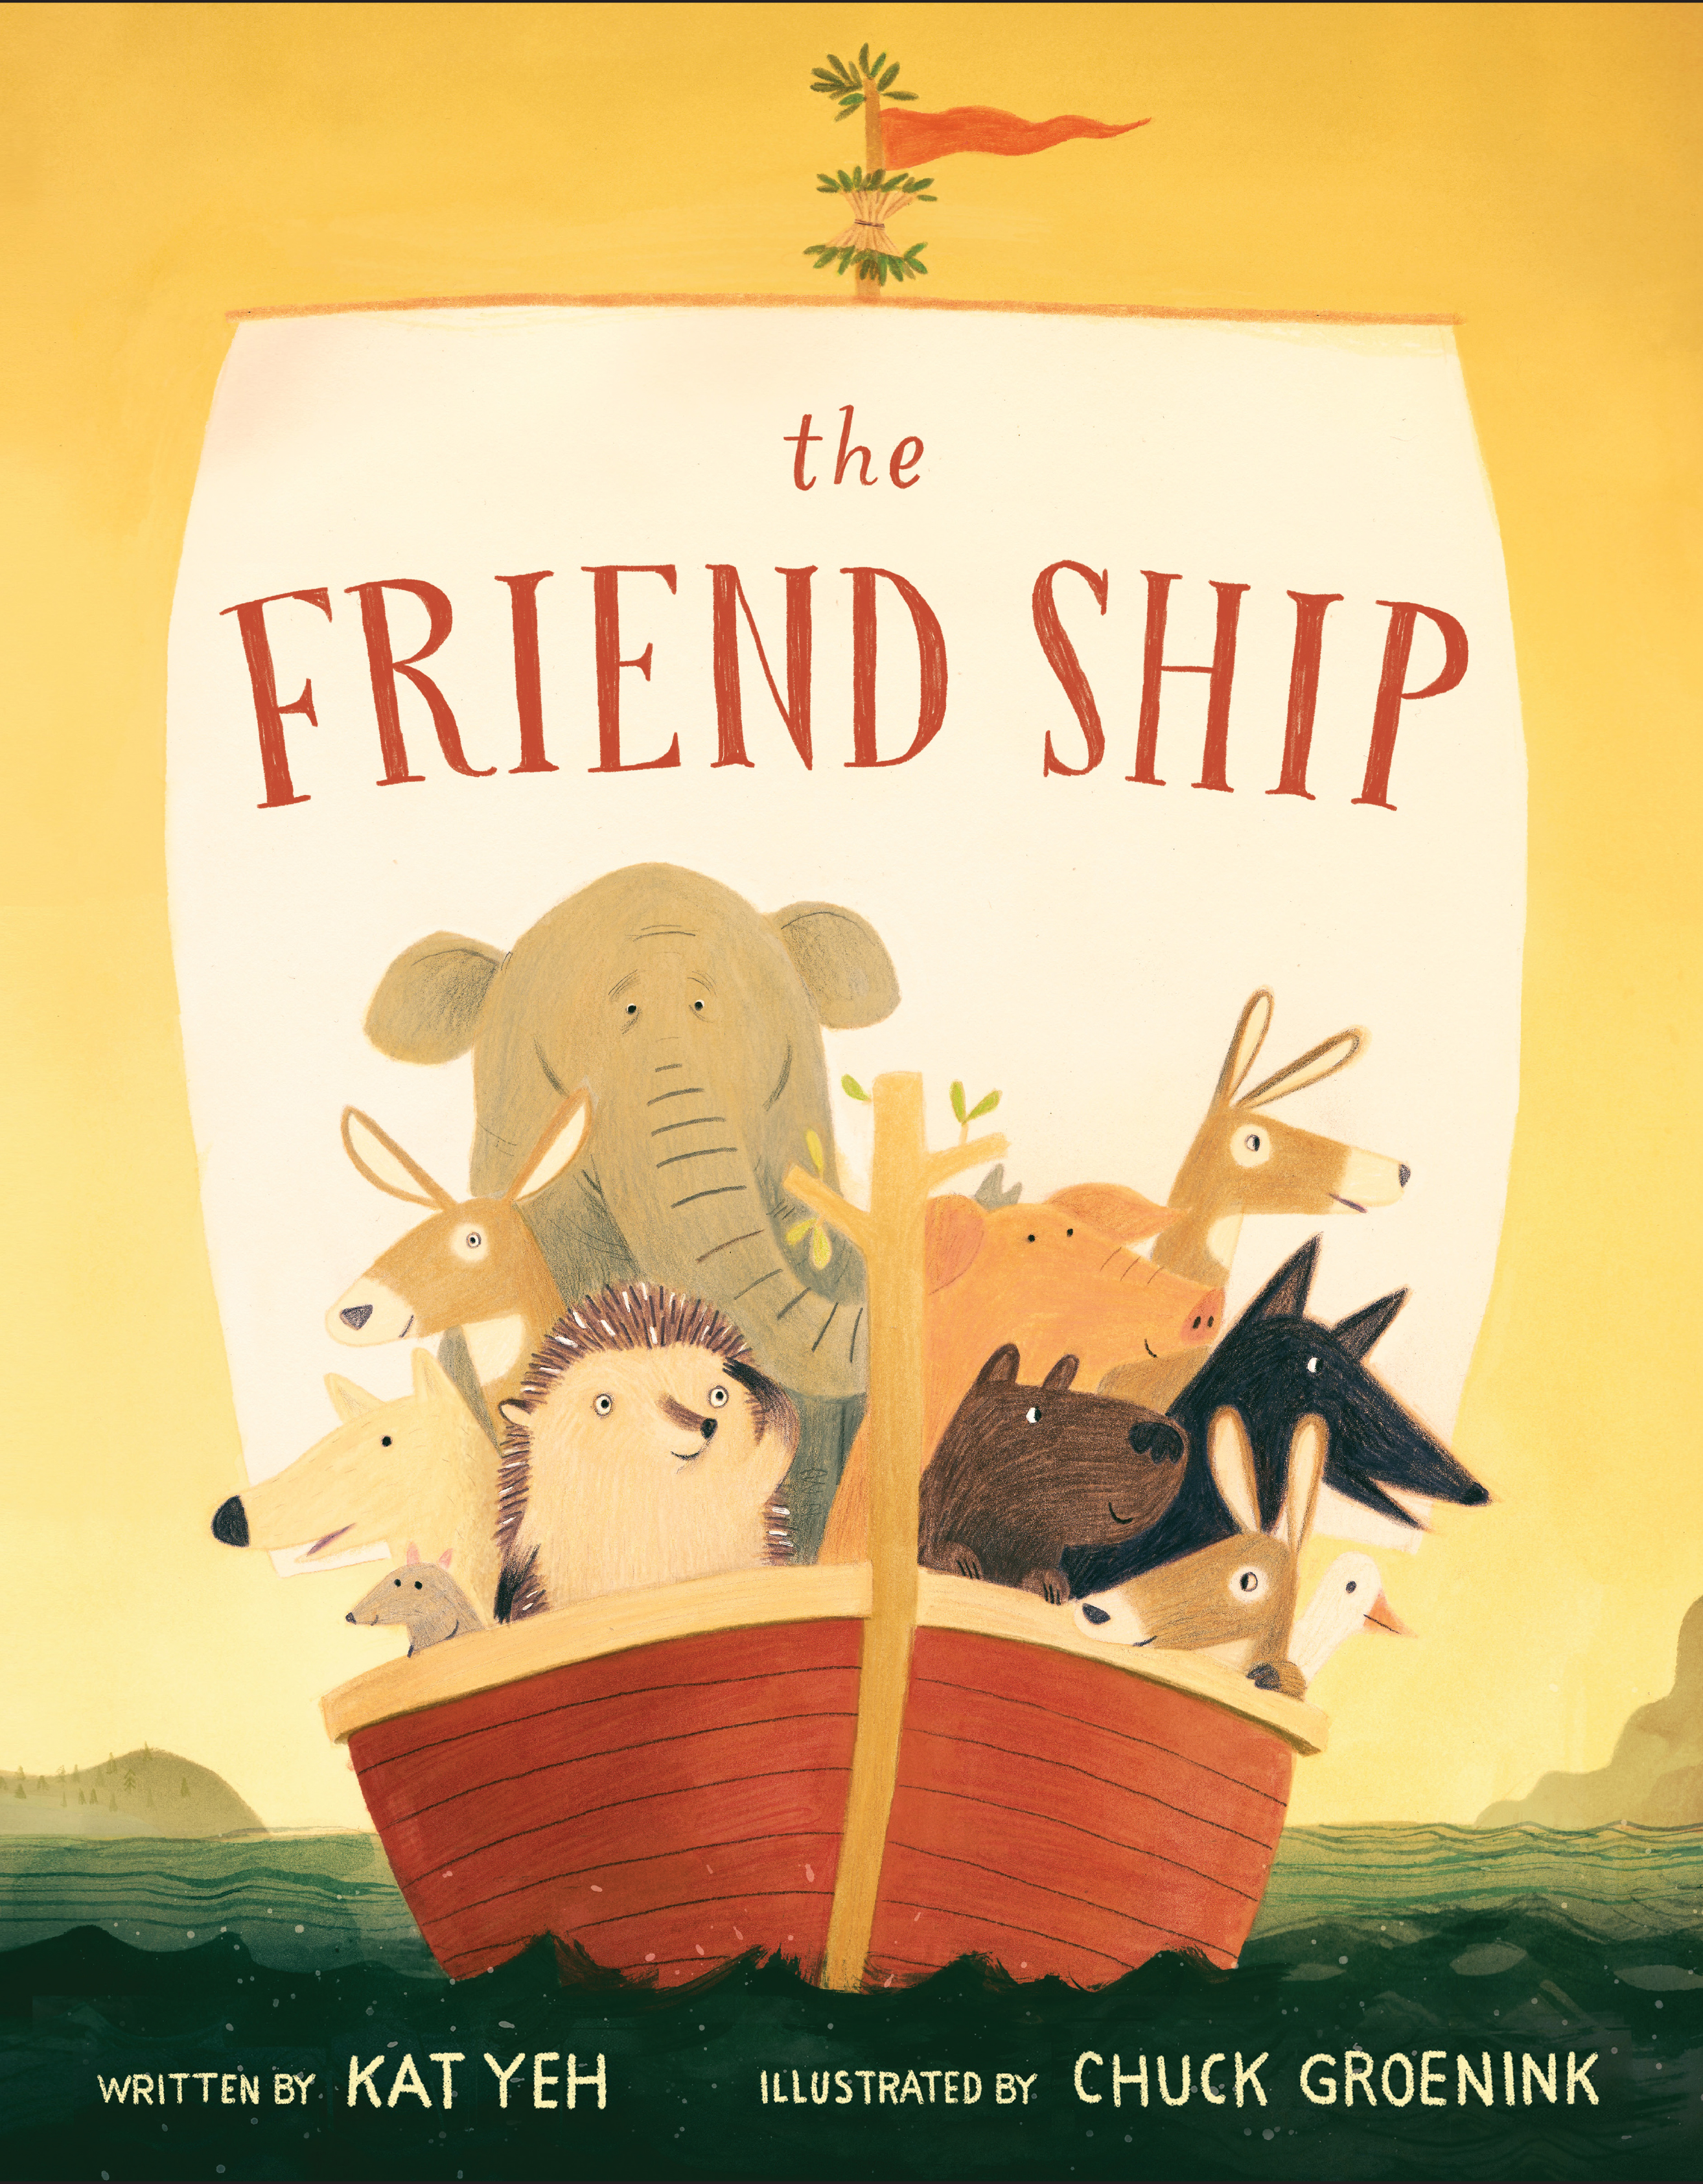 Sunday Story Time with Kat Yeh (Author of The Friend Ship)